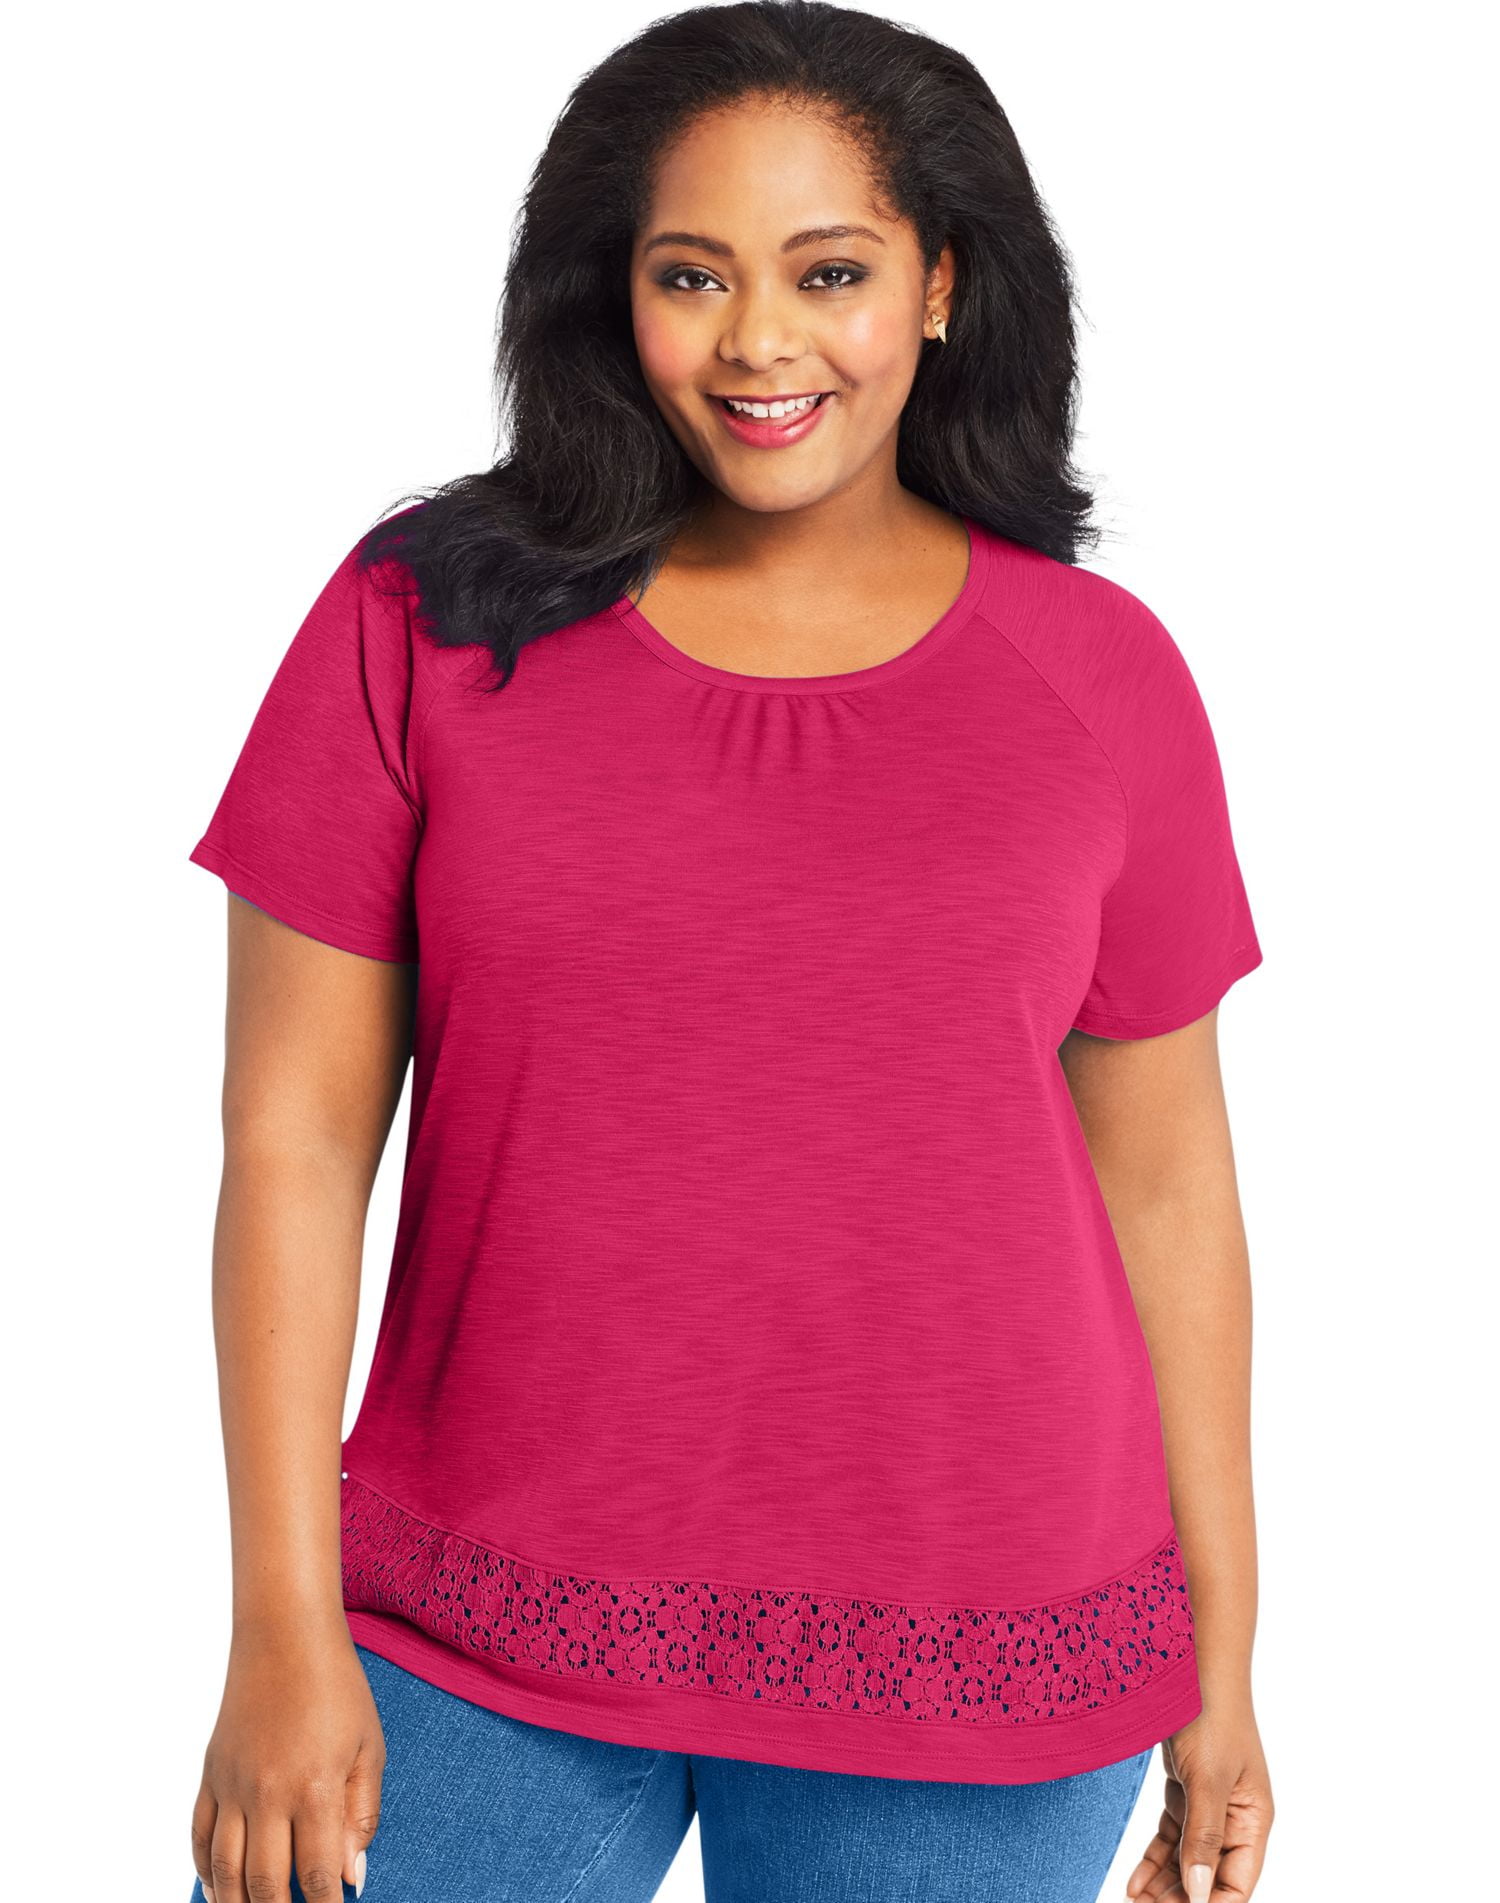 Just My Size Women's Plus Size Raglan Tee with Lace Panel Top - Walmart.com